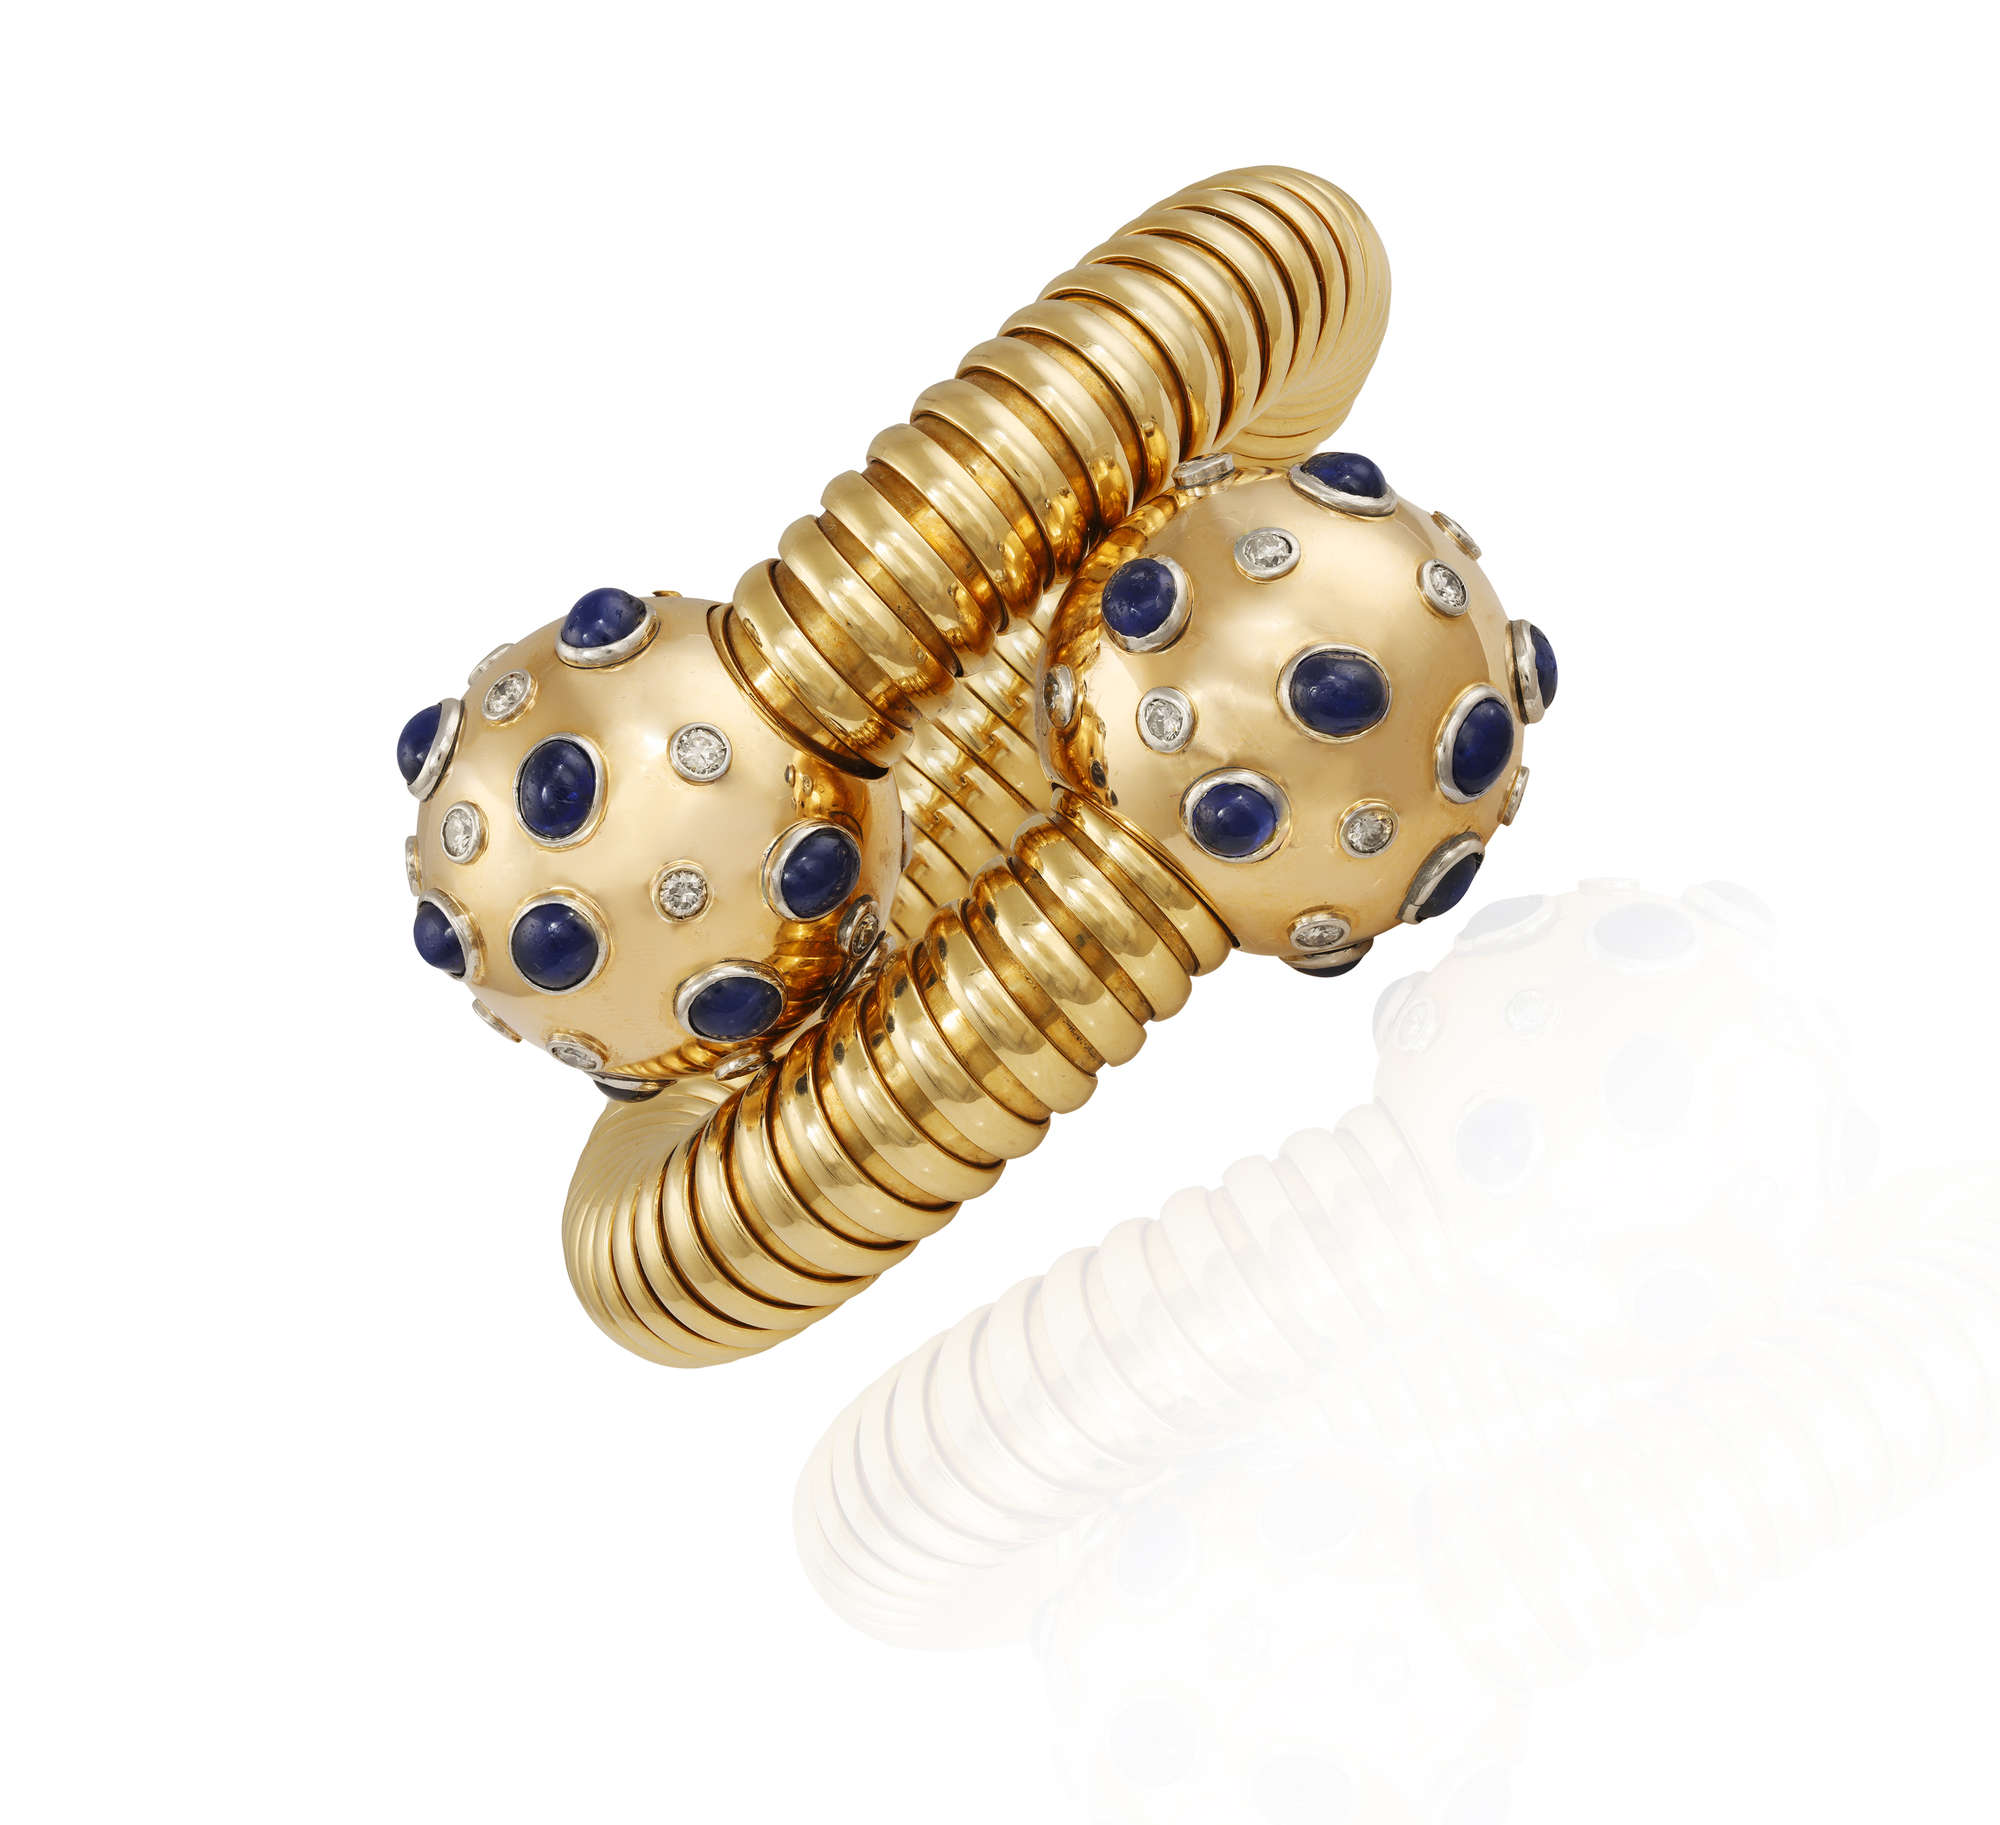 LOT102  THE PRIVATE PROPERTY OF A NOBLE ITALIAN LADY A RARE RETRO  SAPPHIRE AND DIAMOND TUBOGAS BRACELET BY BULGARI CIRCA 1940 The large  coiled gold tubogas bracelet with two spherical terminals